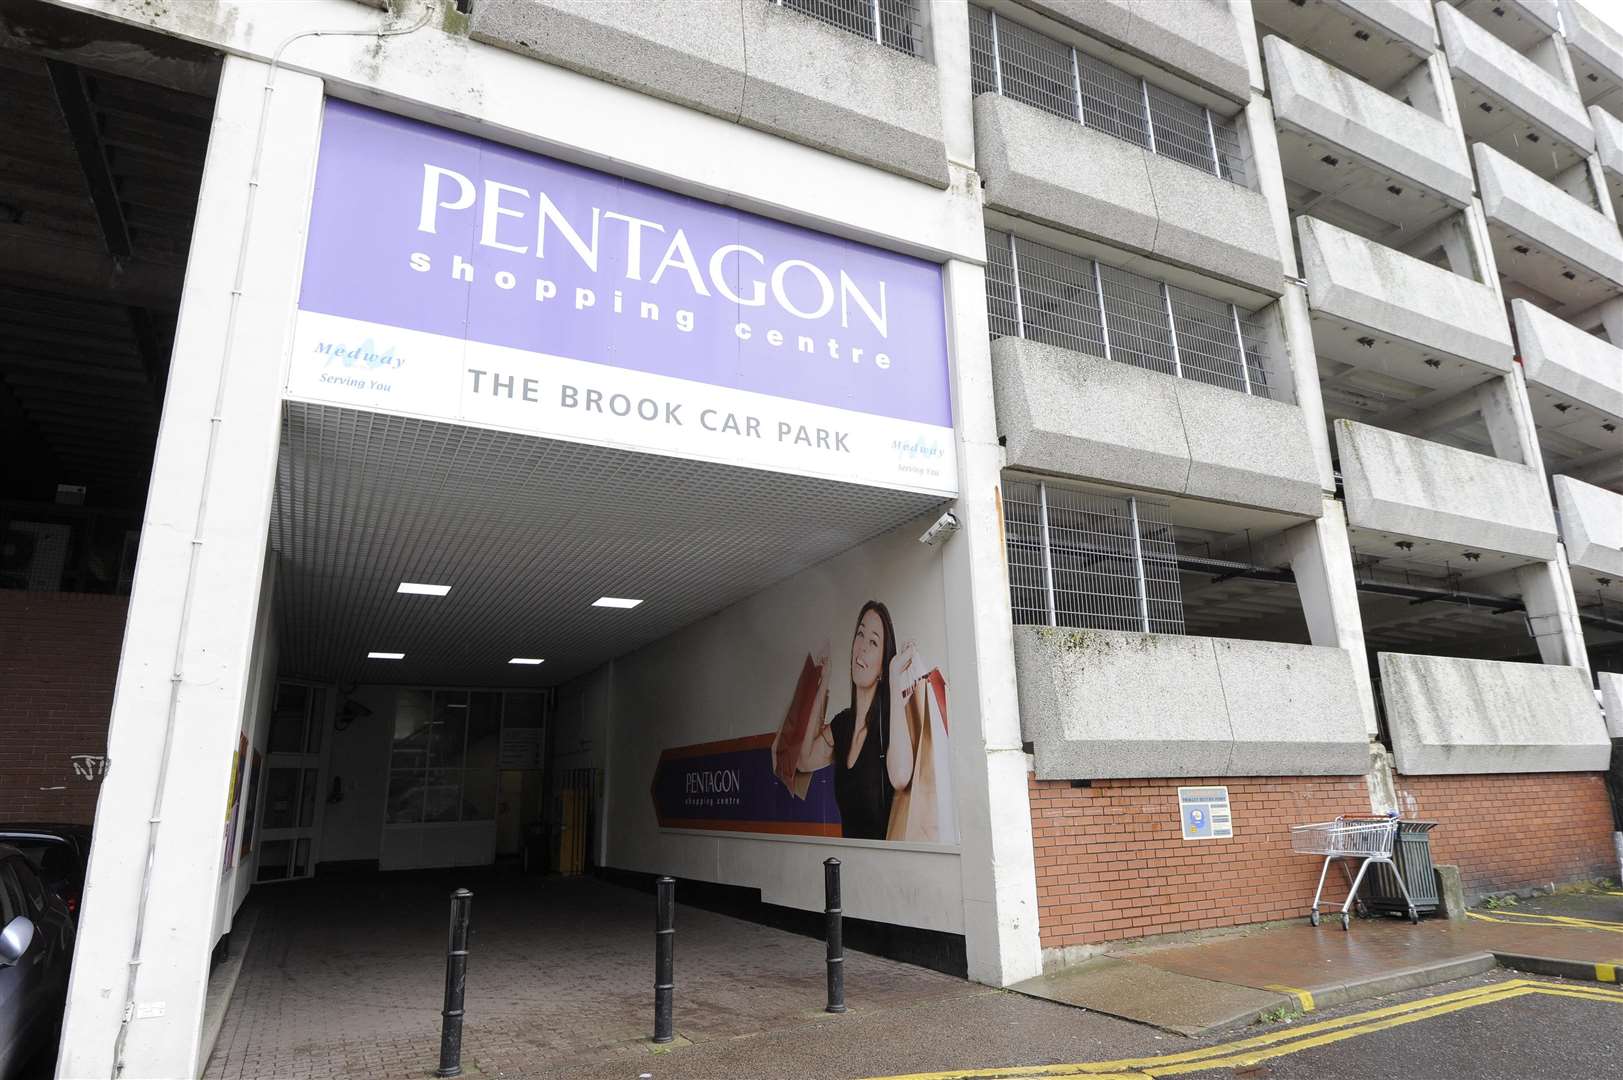 The rapes are alleged to have taken place in the stairwell of the Pentagon Shopping Centre car park